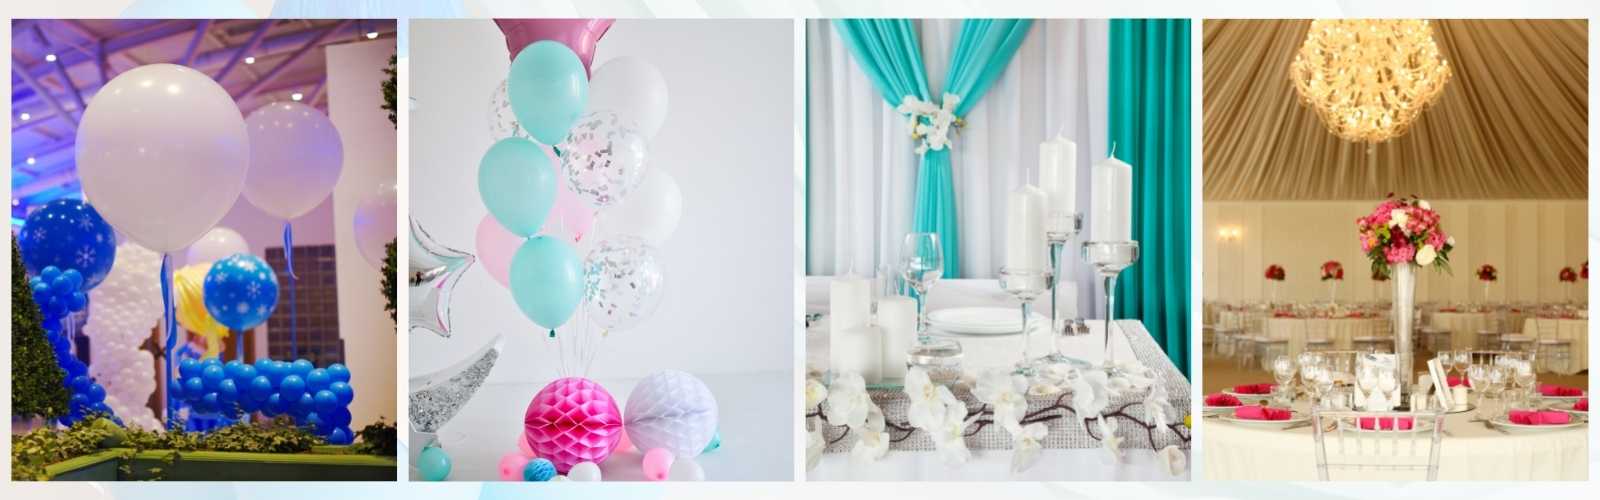 Decorations for events and parties in new york